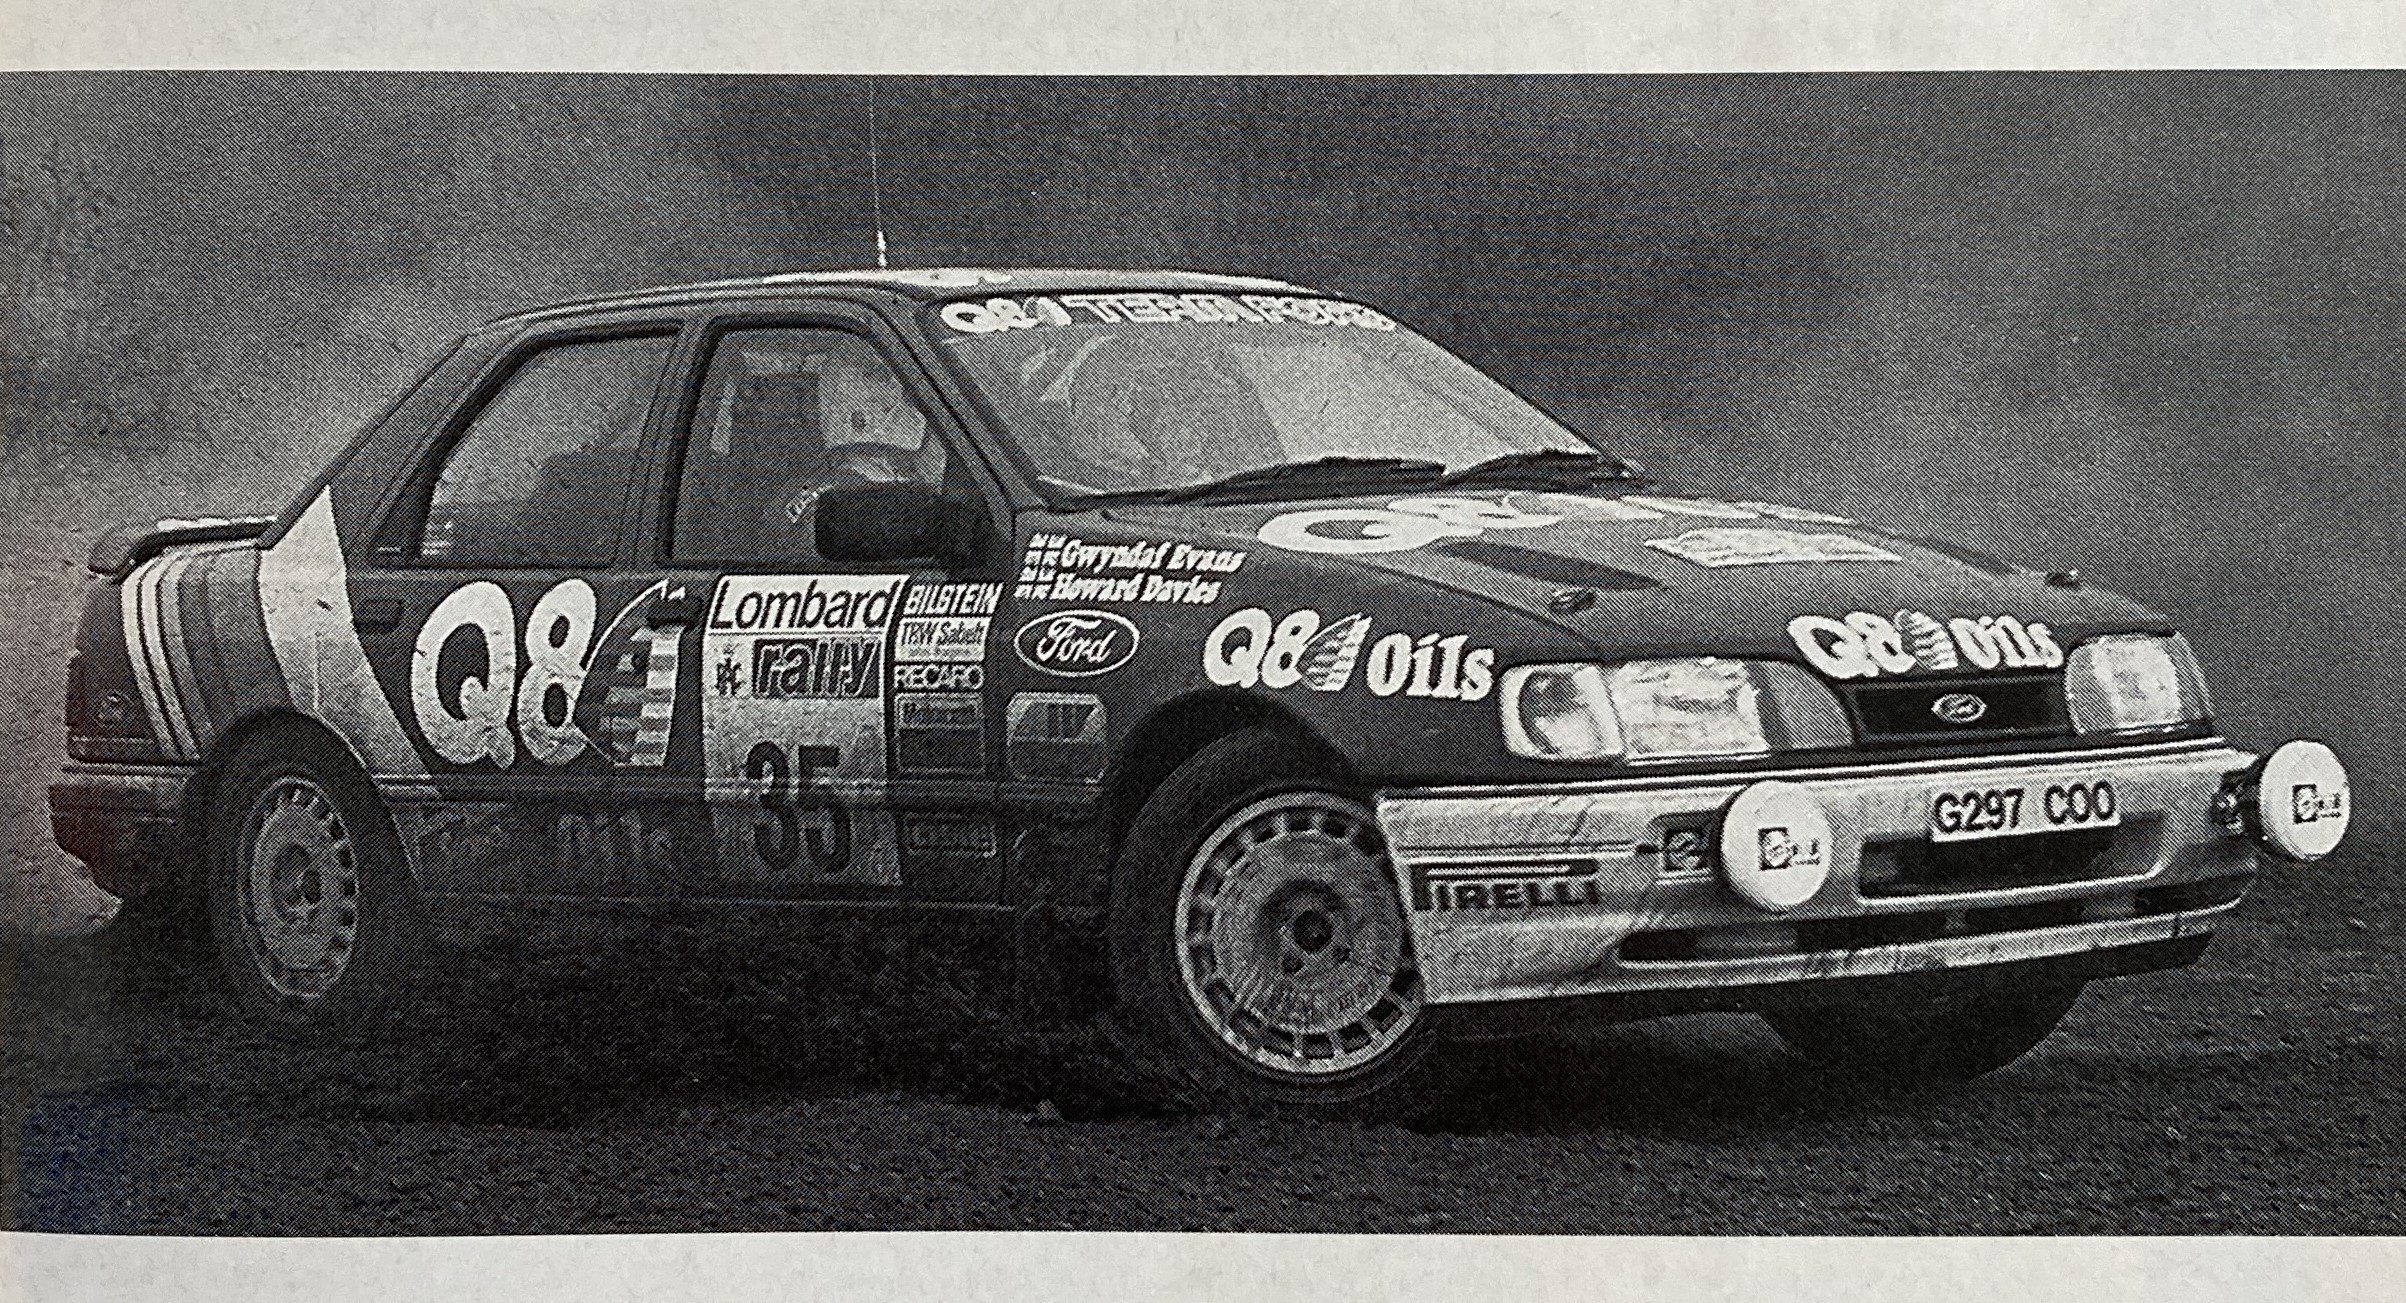 Ad Break: When Sierras were rally cars, not investments